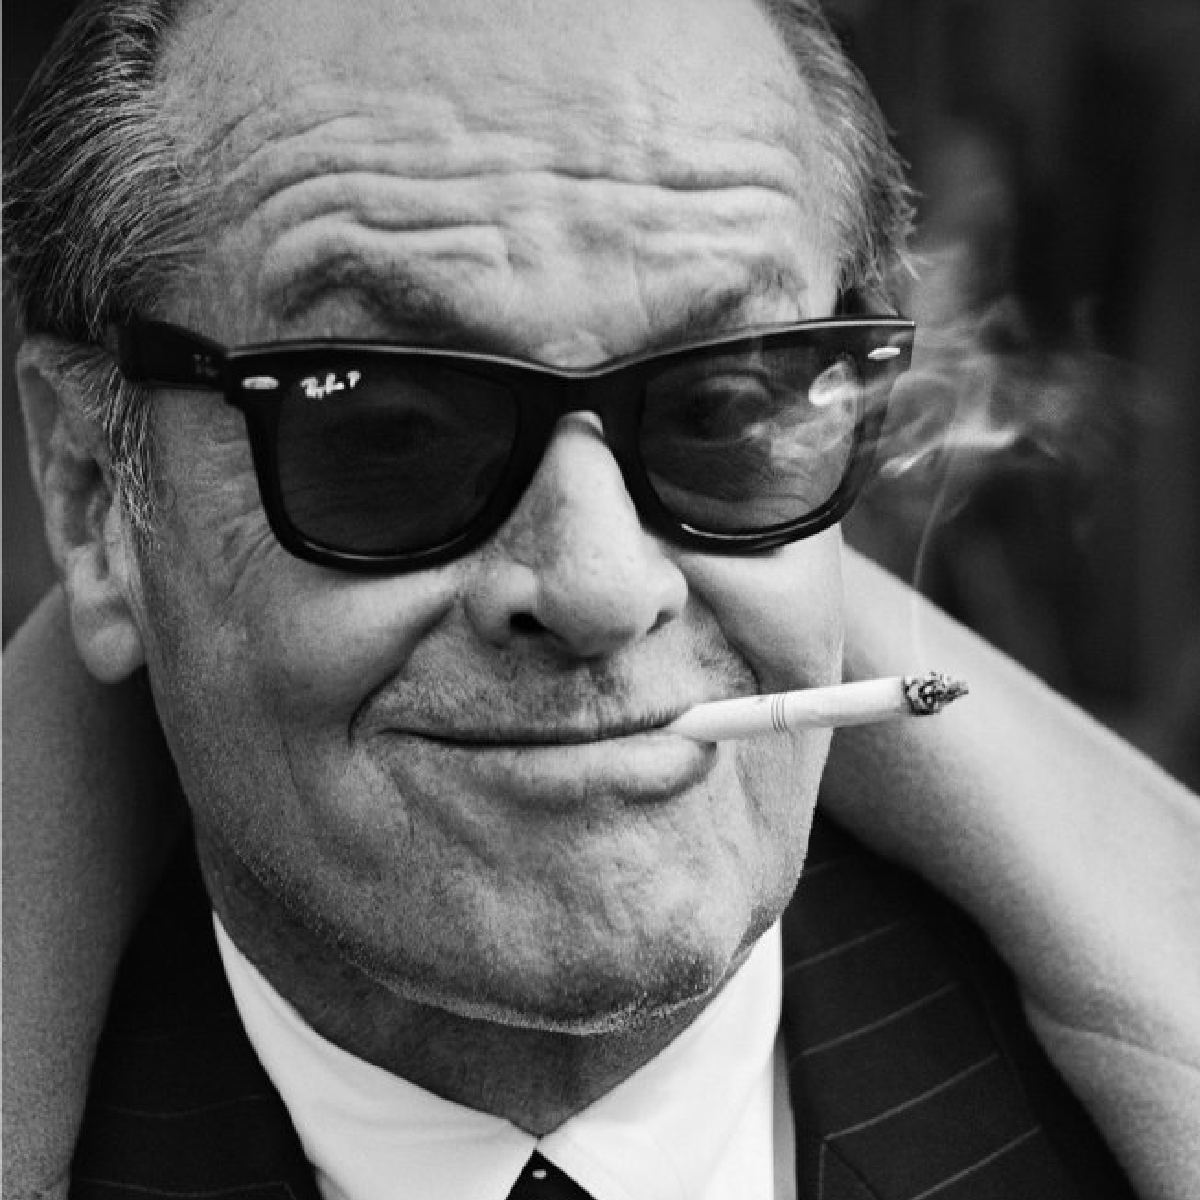 The multifaceted personality of Jack Nicholson